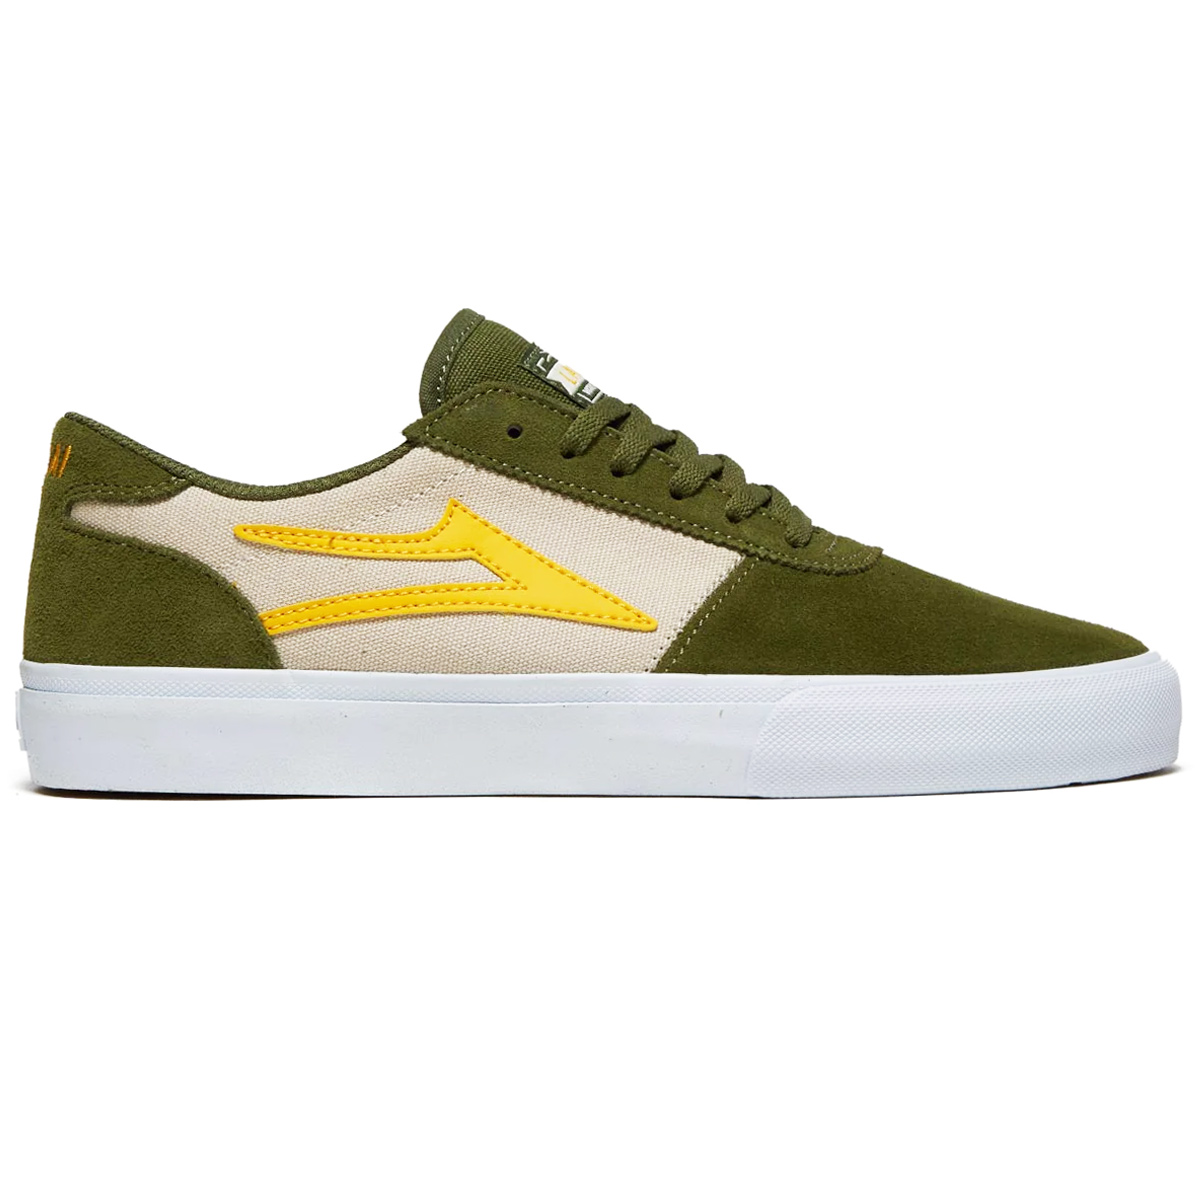 Lakai Manchester Chive Suede